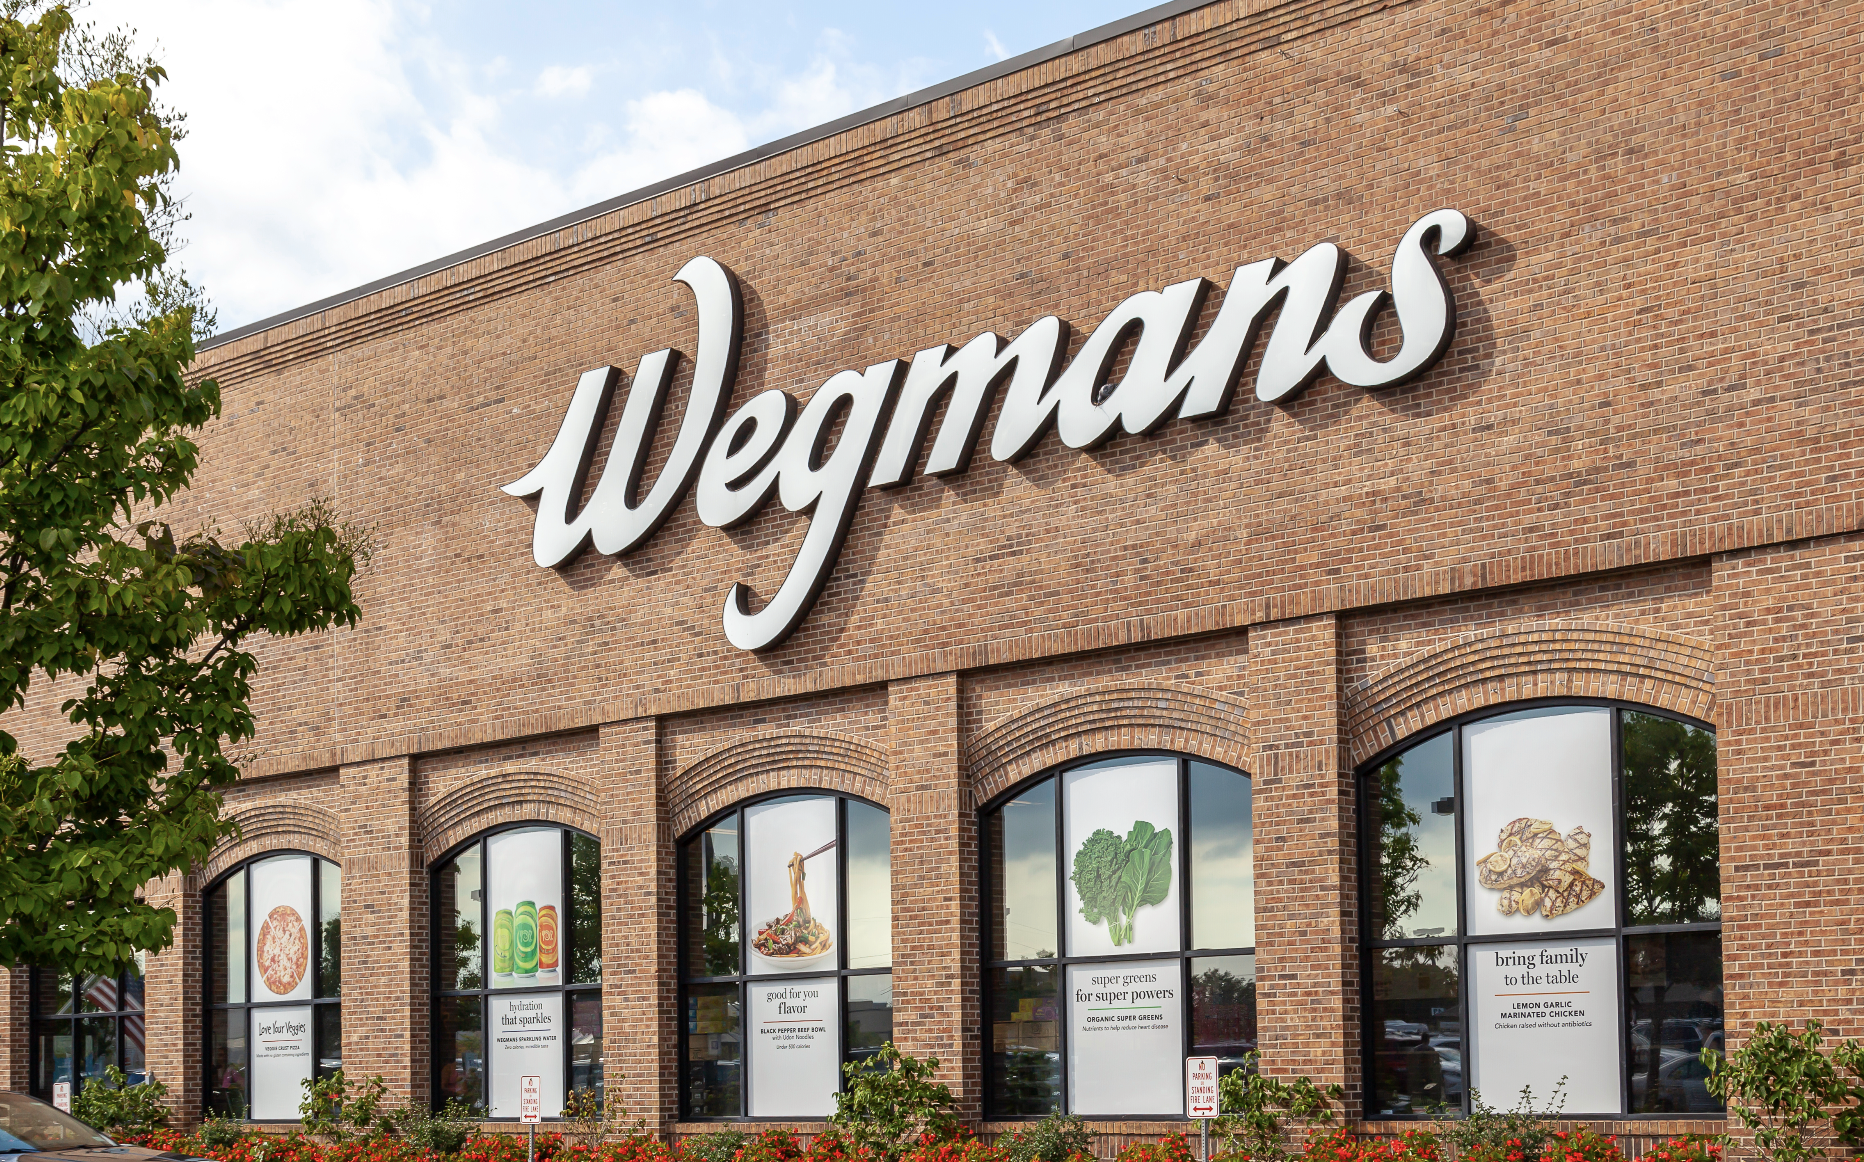 A second Wegmans is likely opening in Manhattan in the near future